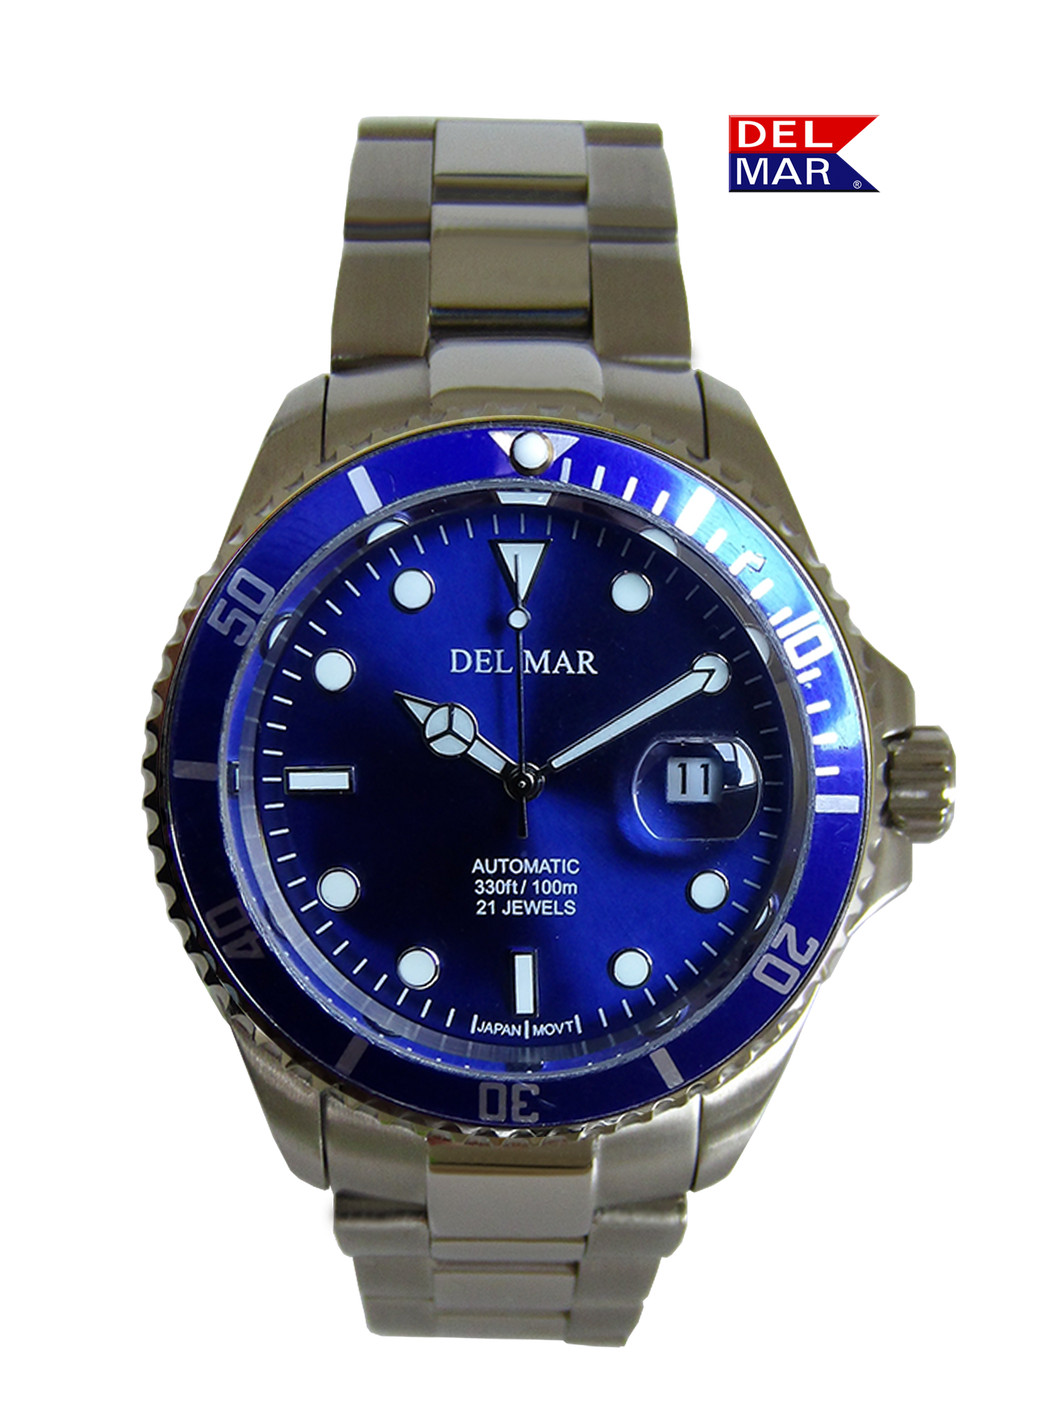 Del Mar Watches Men's Automatic Watch Blue Dial, Stainless Steel Band #50391